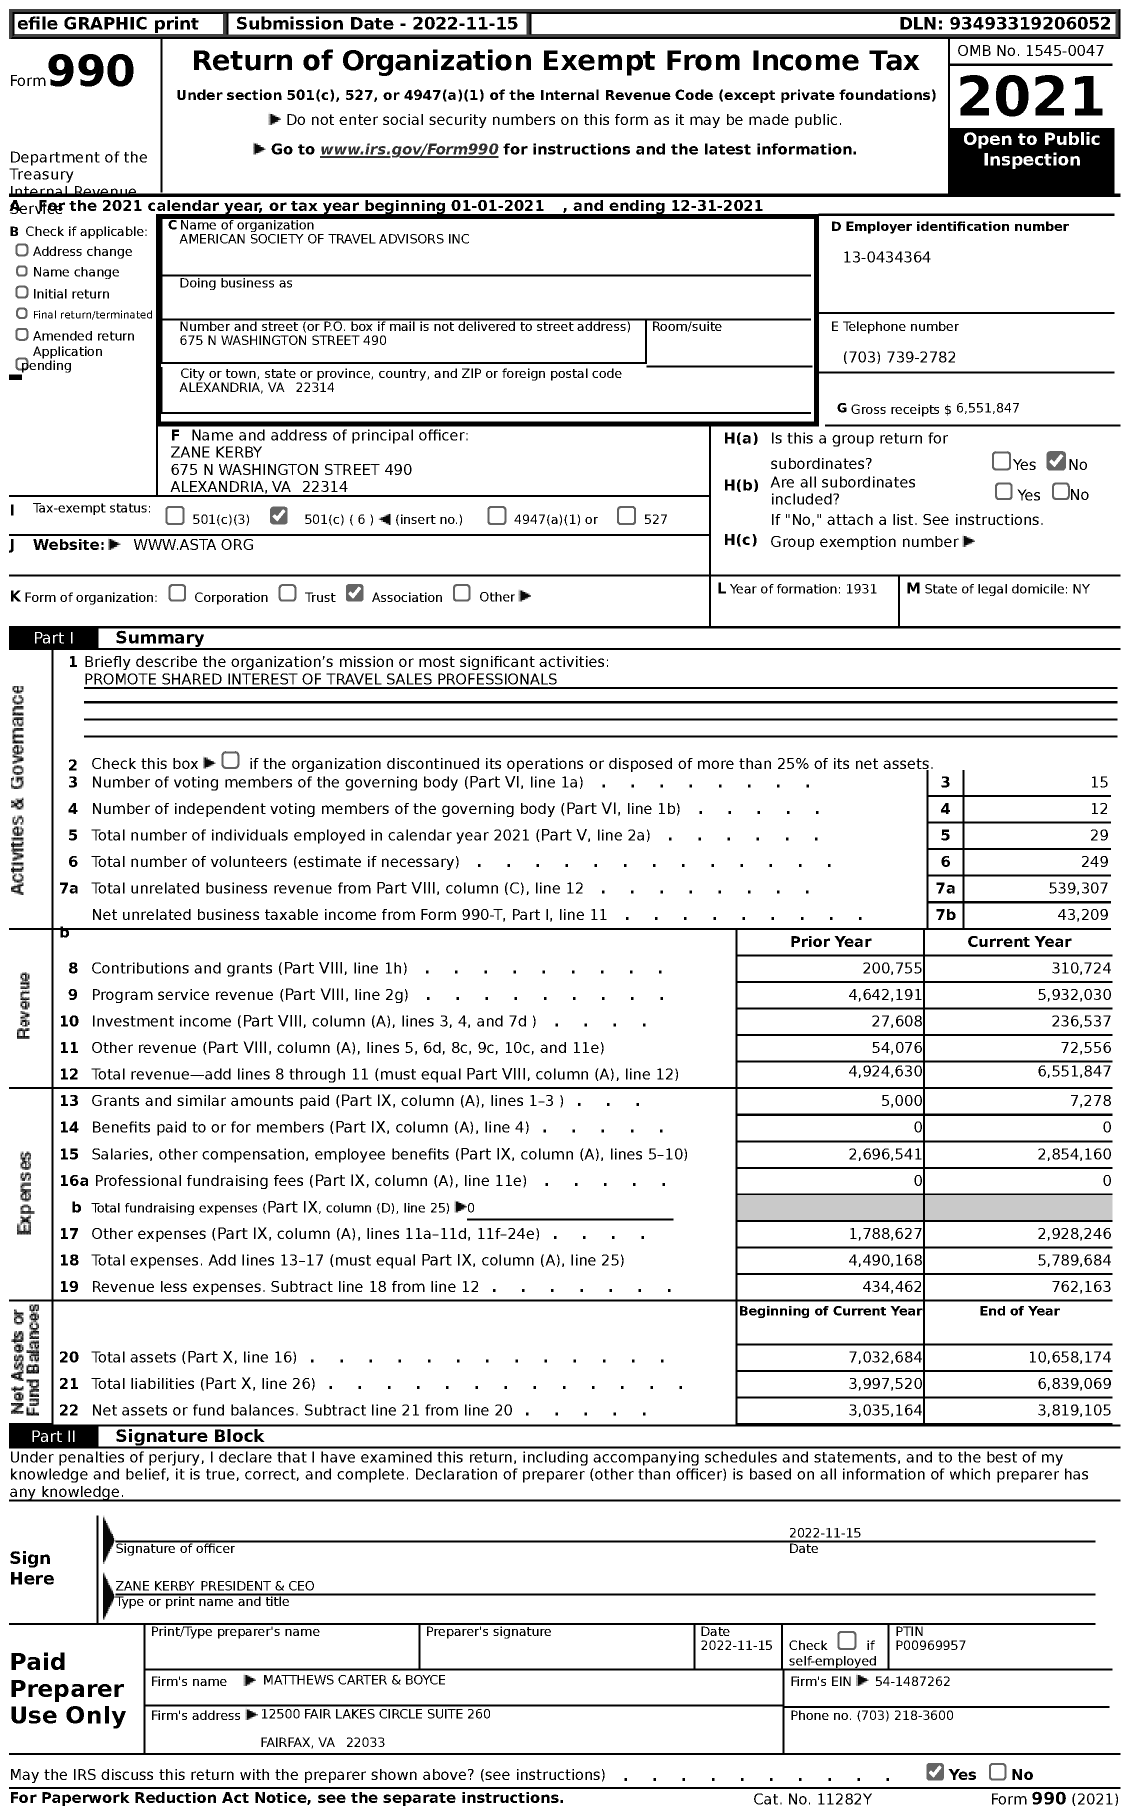 Image of first page of 2021 Form 990 for American Society of Travel Advisors (ASTA)